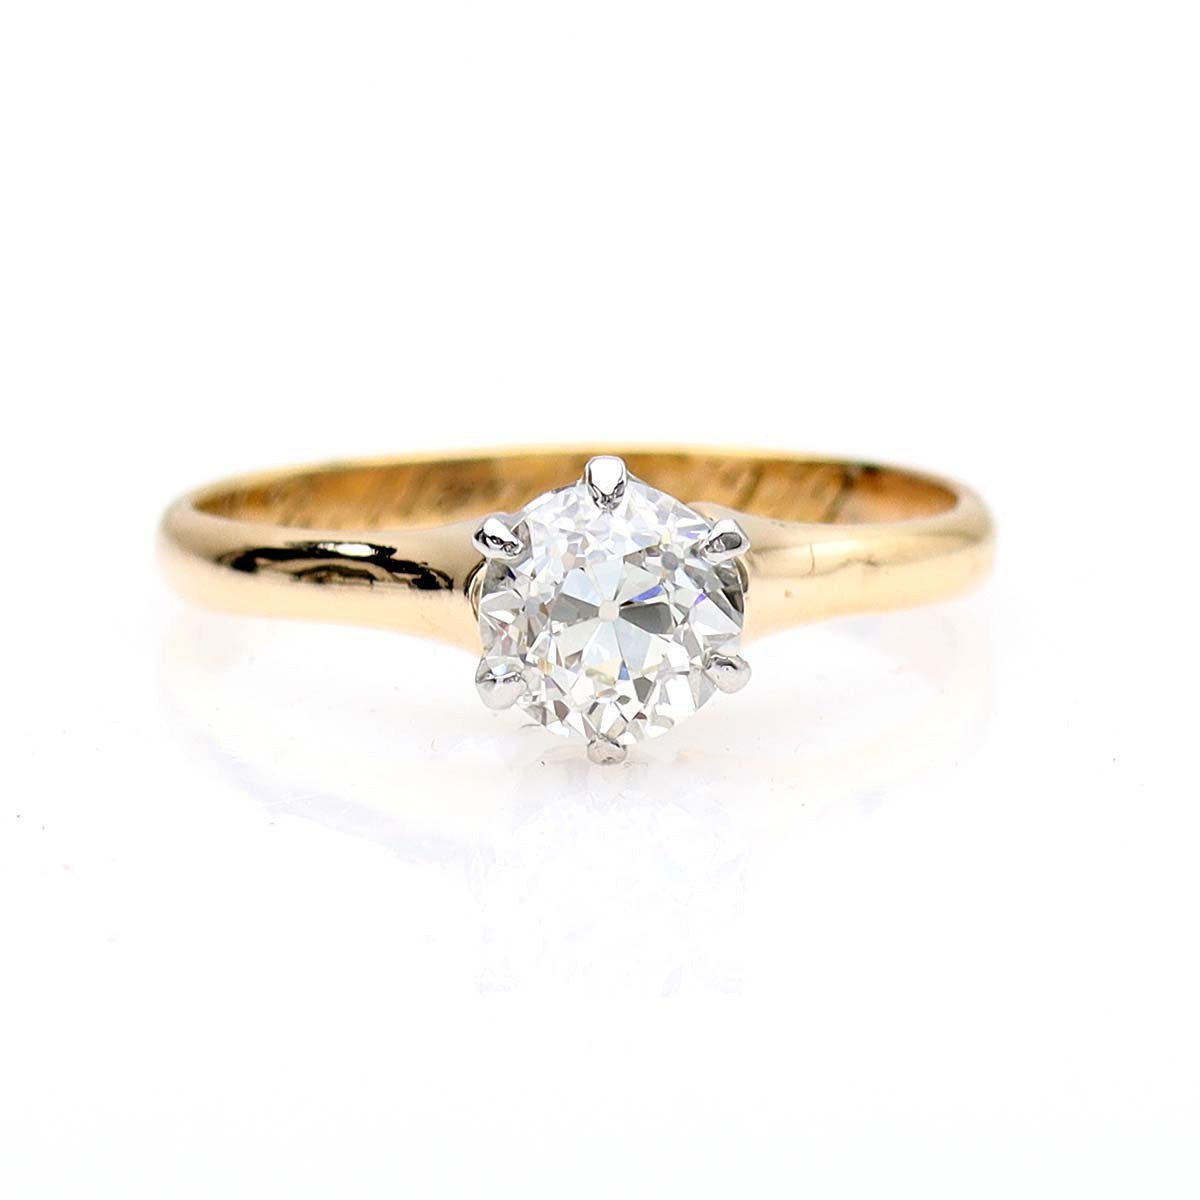 Early 1900s Old European Cut Diamond engagement ring #VR230516-1